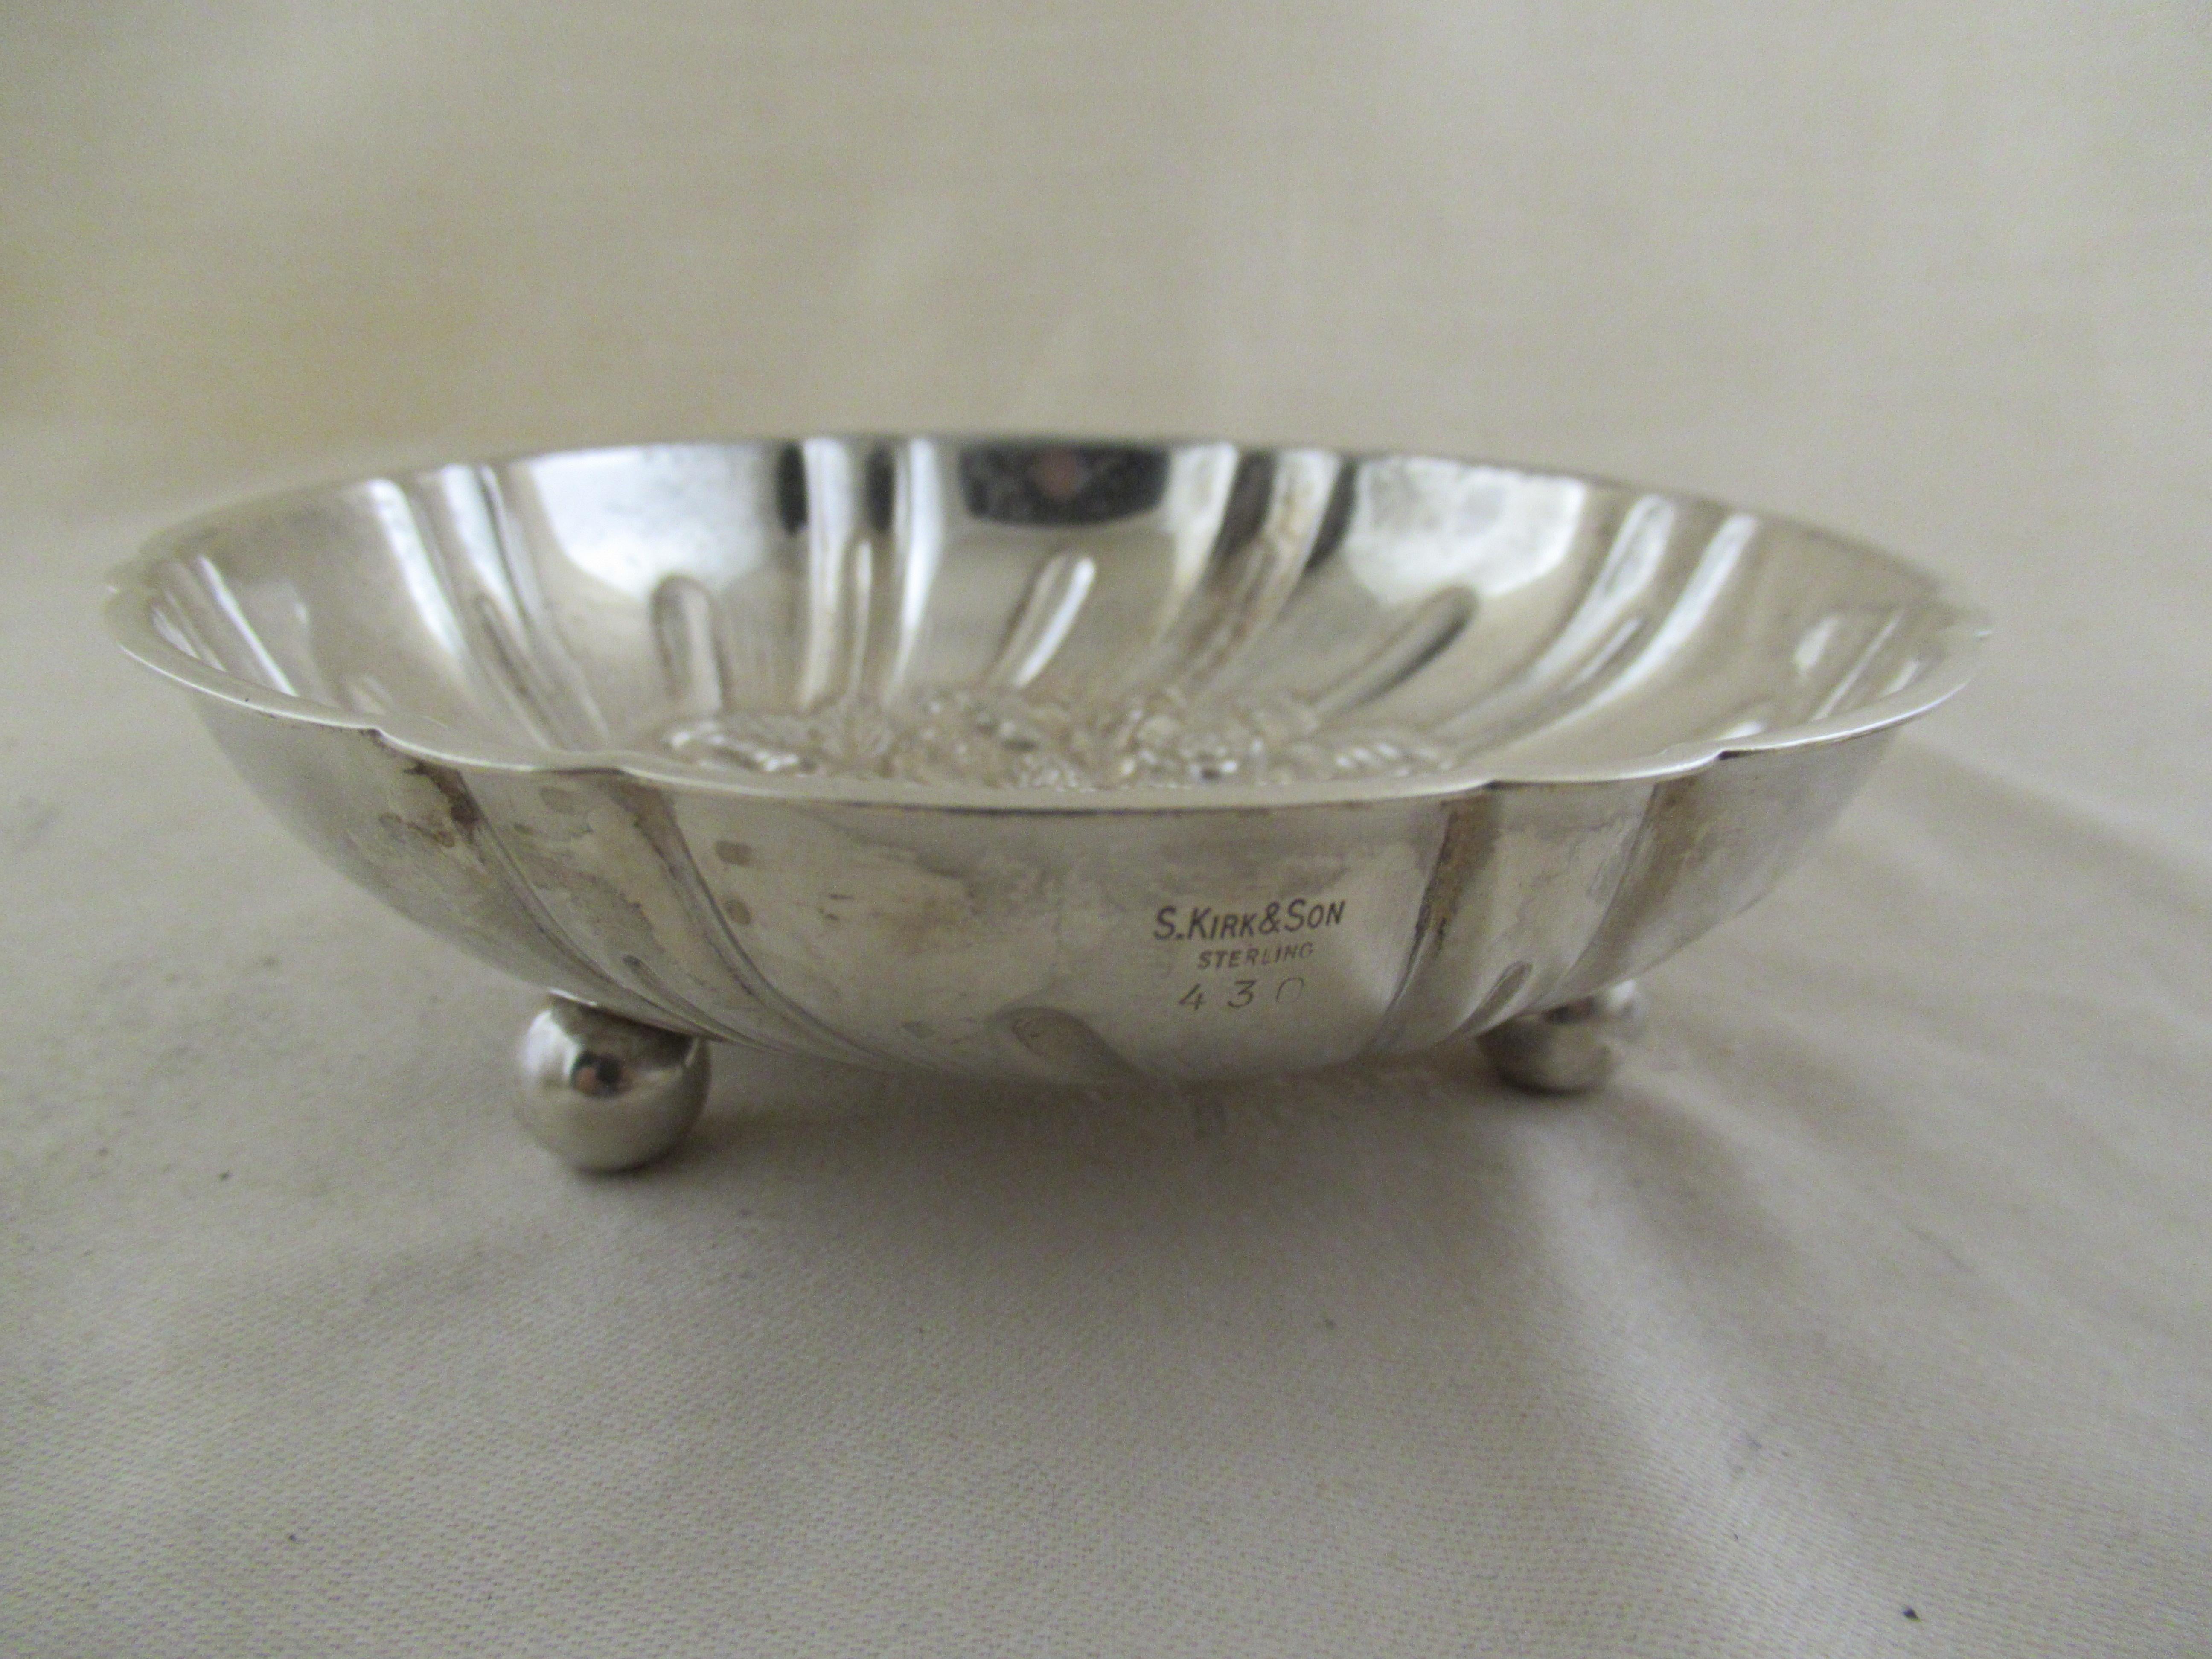 American Solid Sterling Silver Conserve Dish & Spoon, Made by Kirk & Son, Maryland